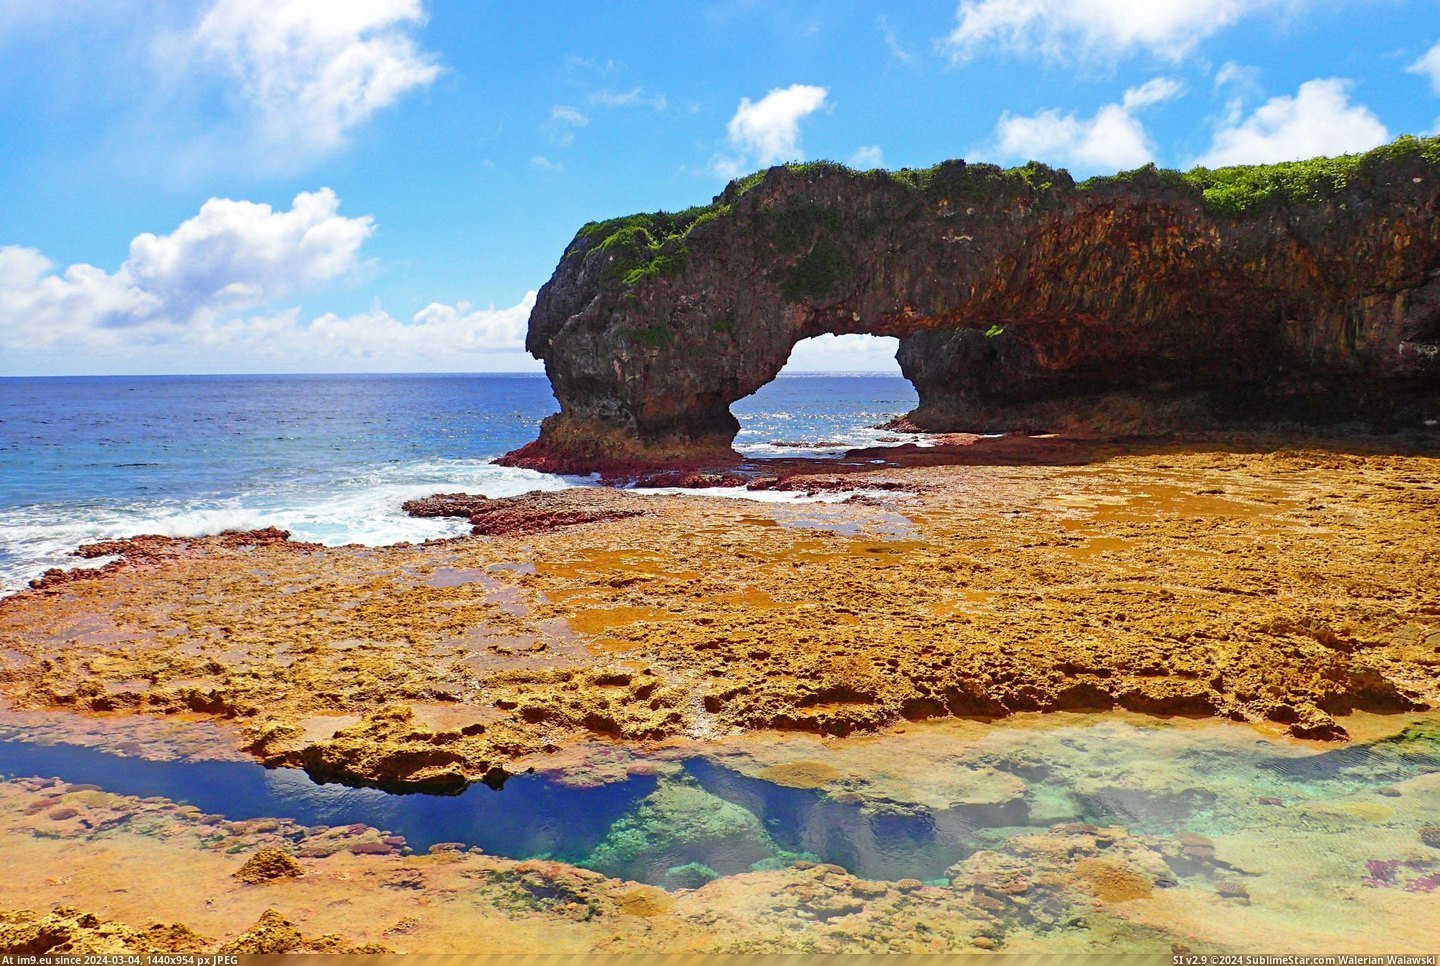 #Tiny #Island #Rock #Coastline #Formations #Country #Arches #Coral [Earthporn] Coral channels and rock formations make up the coastline of this tiny island country | Talava Arches, Niue  [4608x30 Pic. (Bild von album My r/EARTHPORN favs))